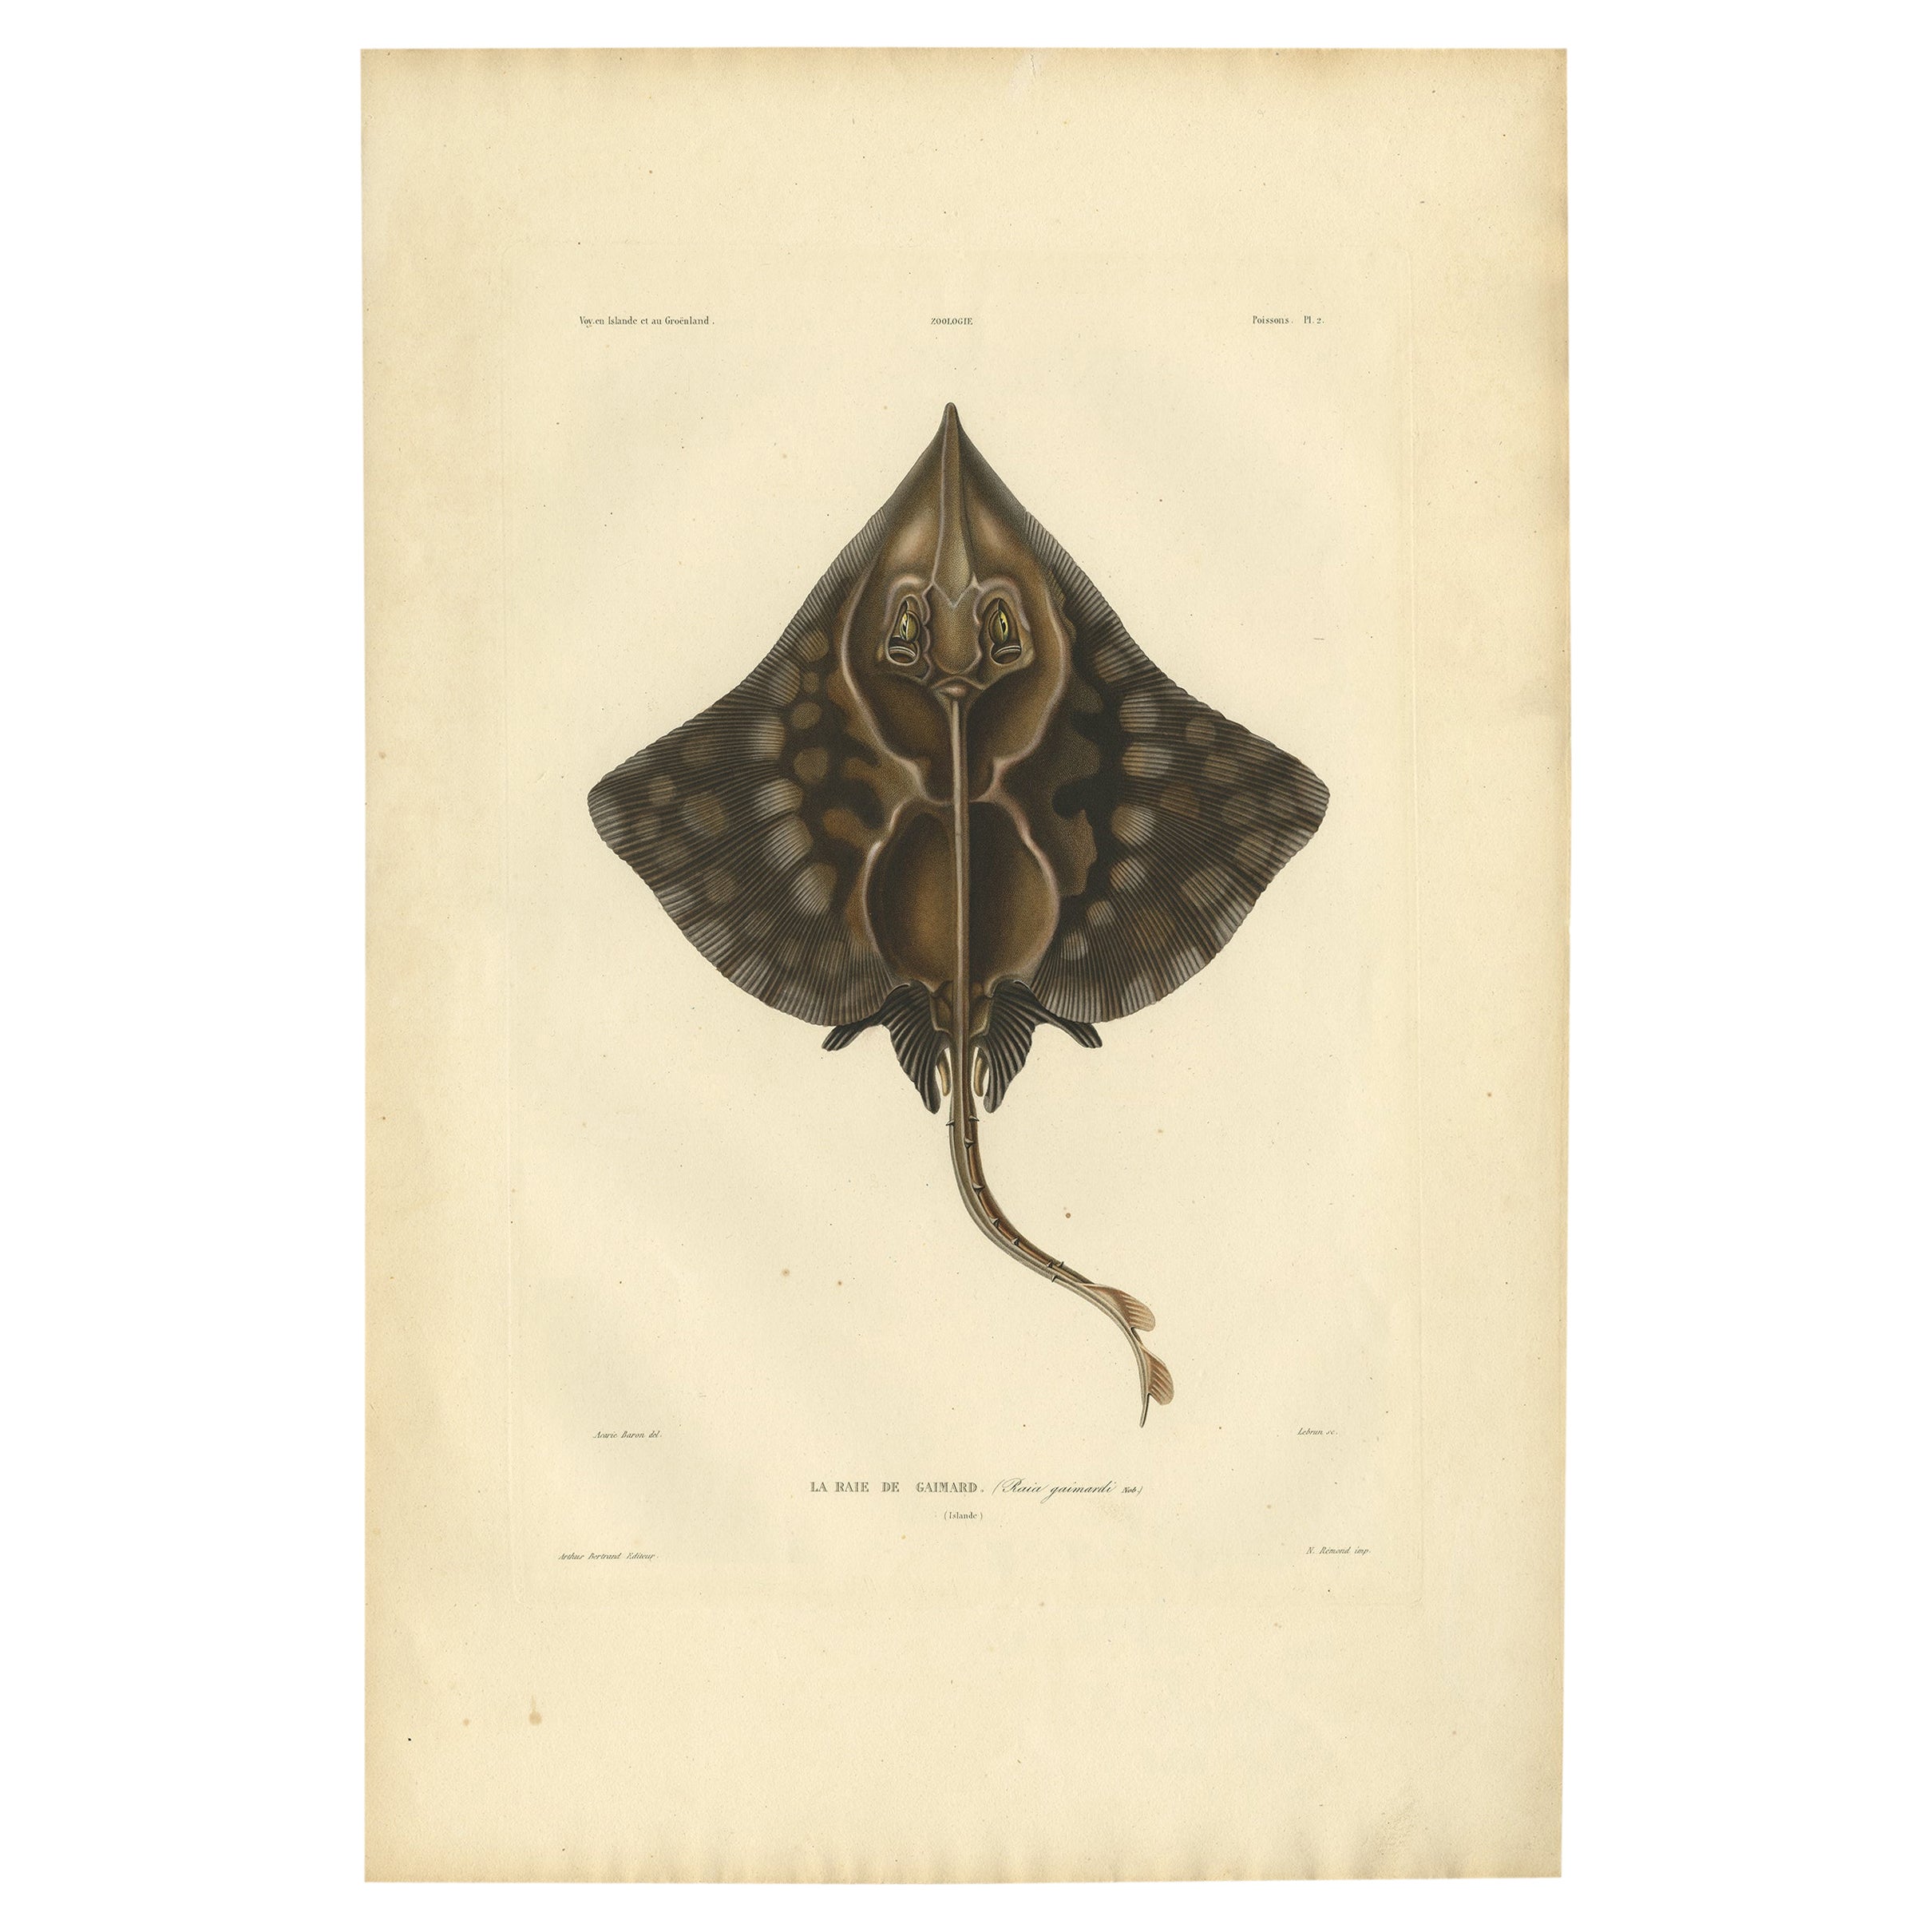 Rare Hand-Colored Antique Fish Print of the Gaimard's Ray, 1842